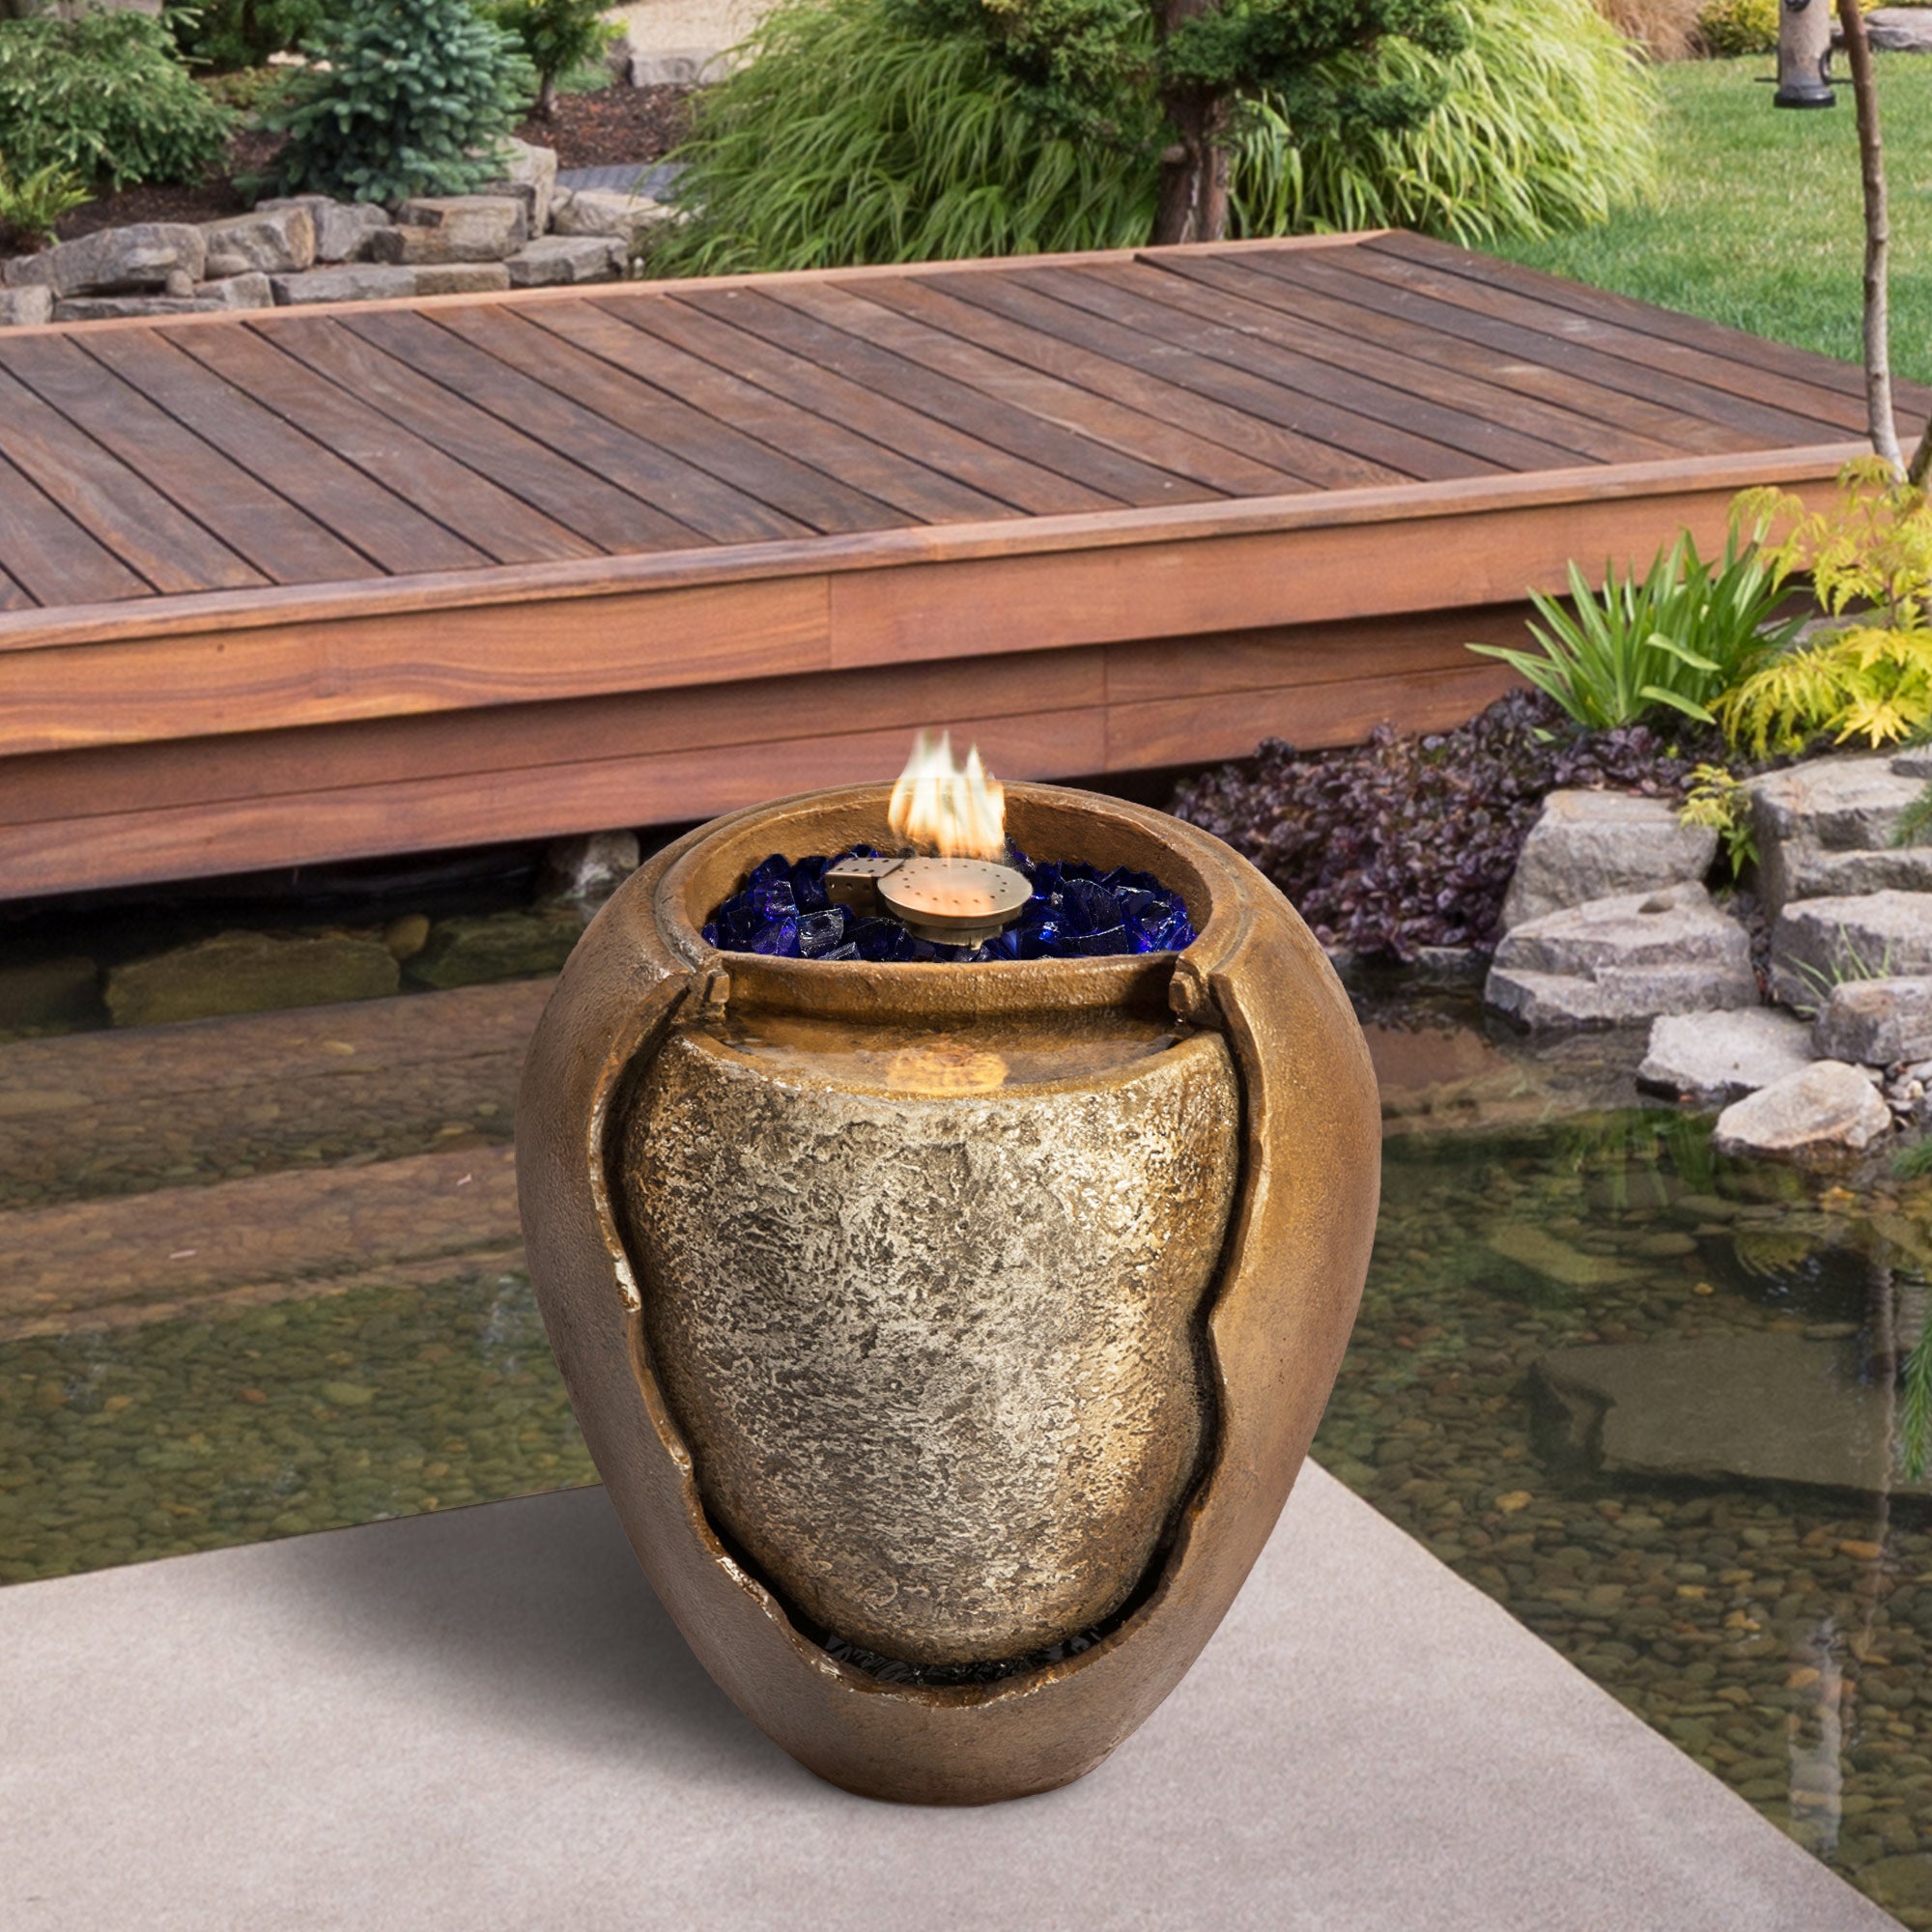 Teamson Home Large Outdoor Water Fountain Pot with Fire Pit and Fire Glass, Brown